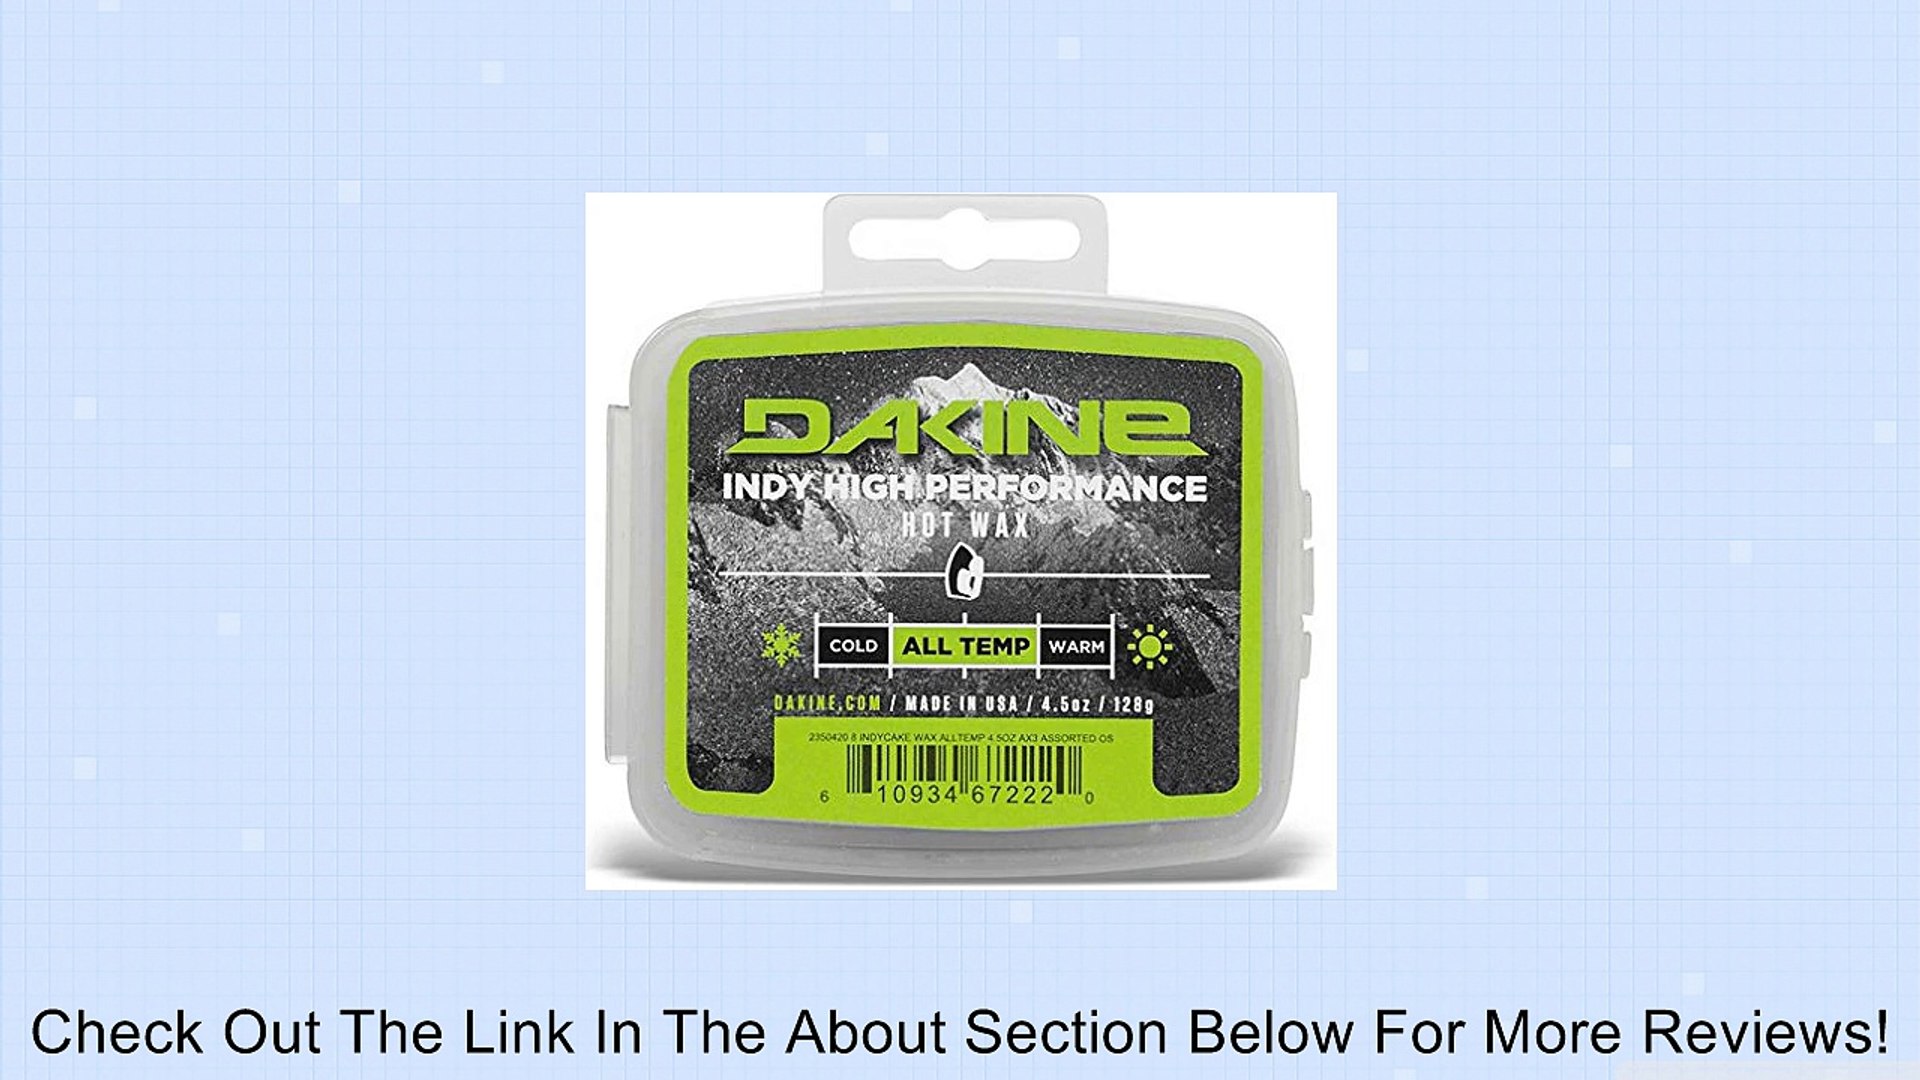 DaKine Unisex Indy Hot Wax All Temp Review - video Dailymotion